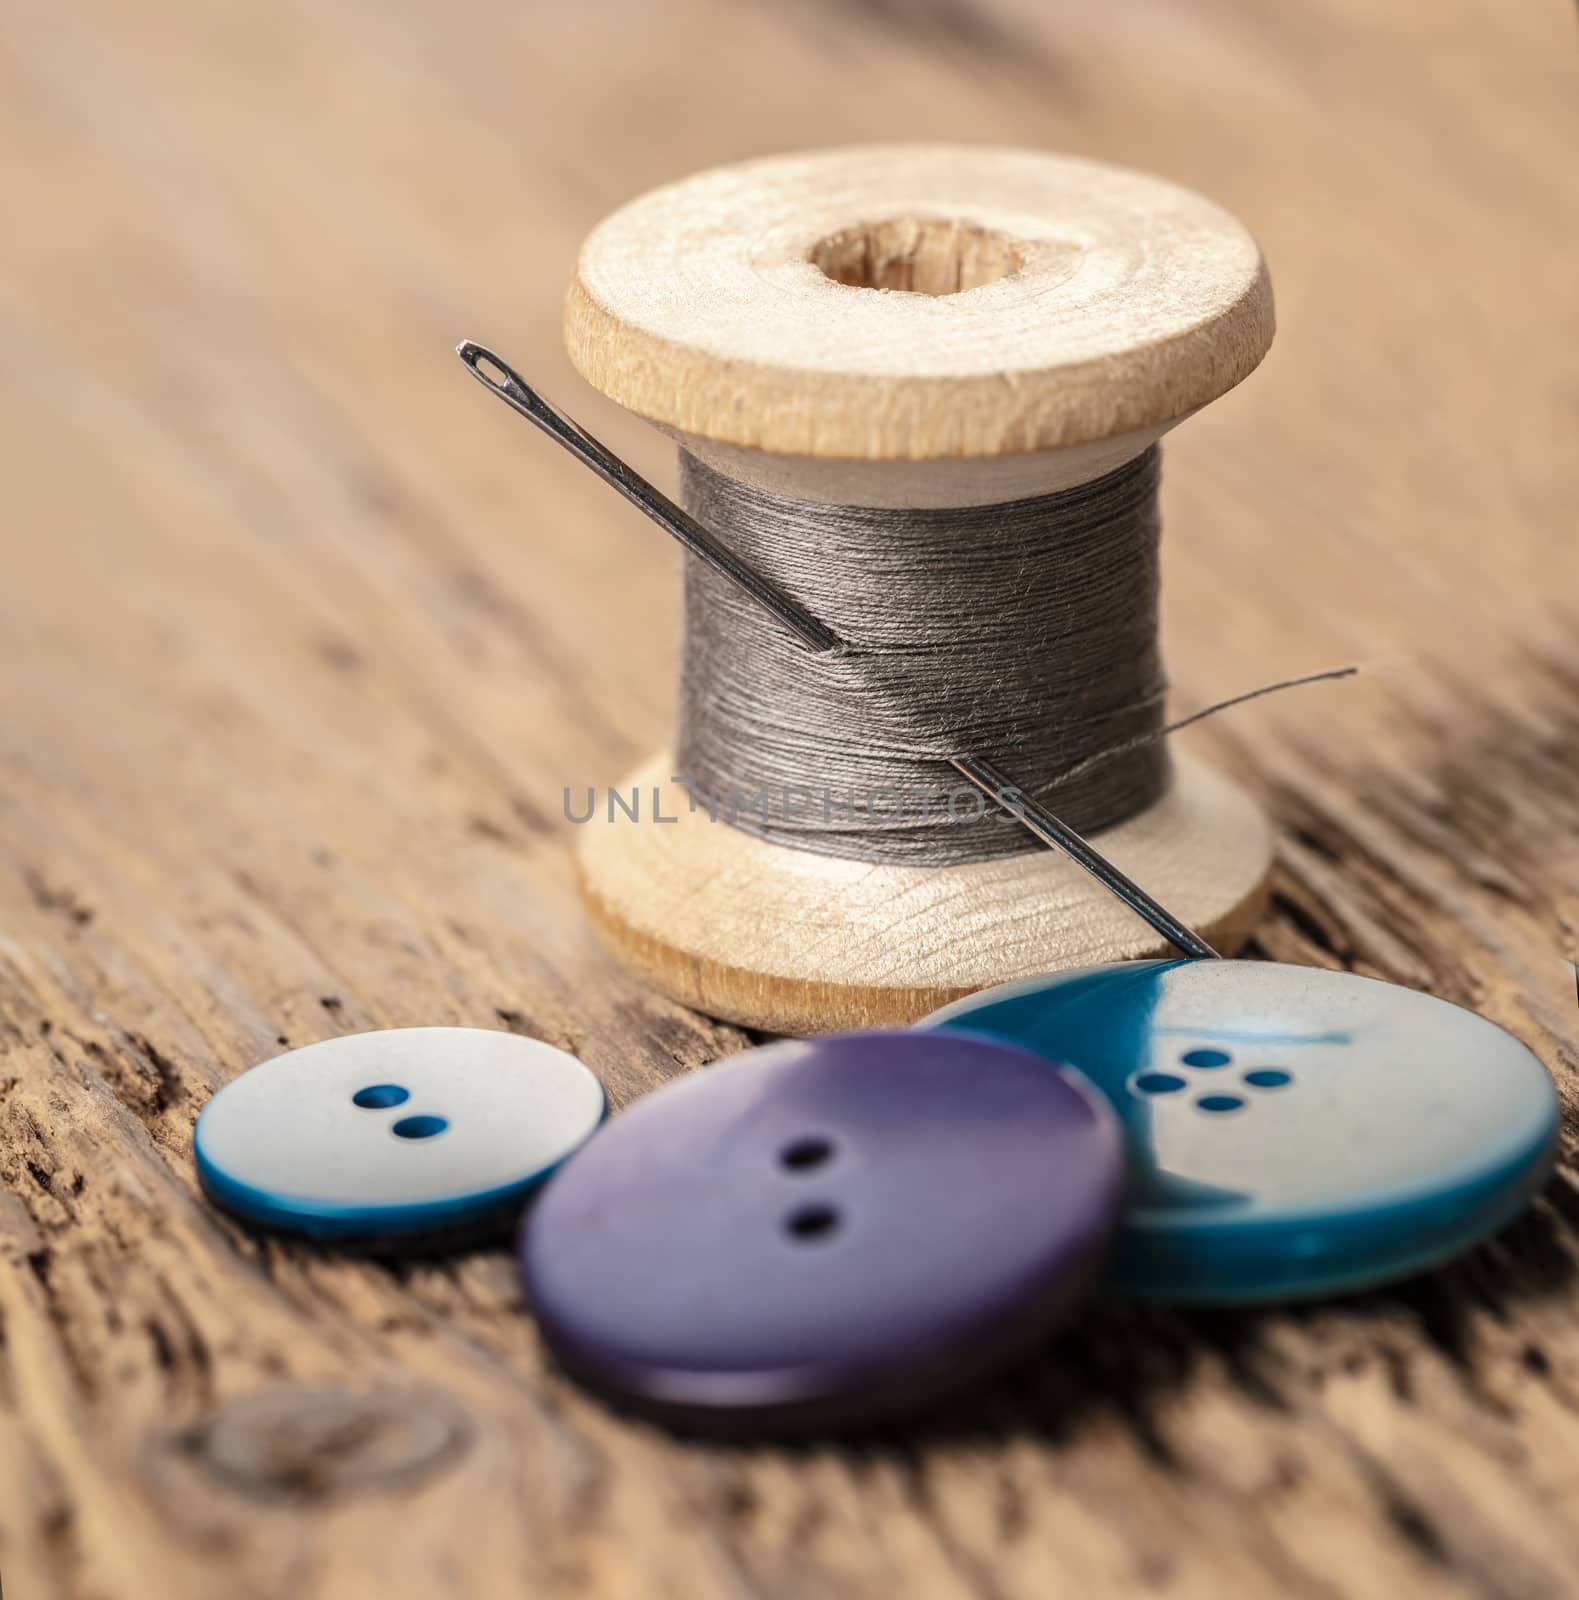 spool of threads and buttons  by MegaArt